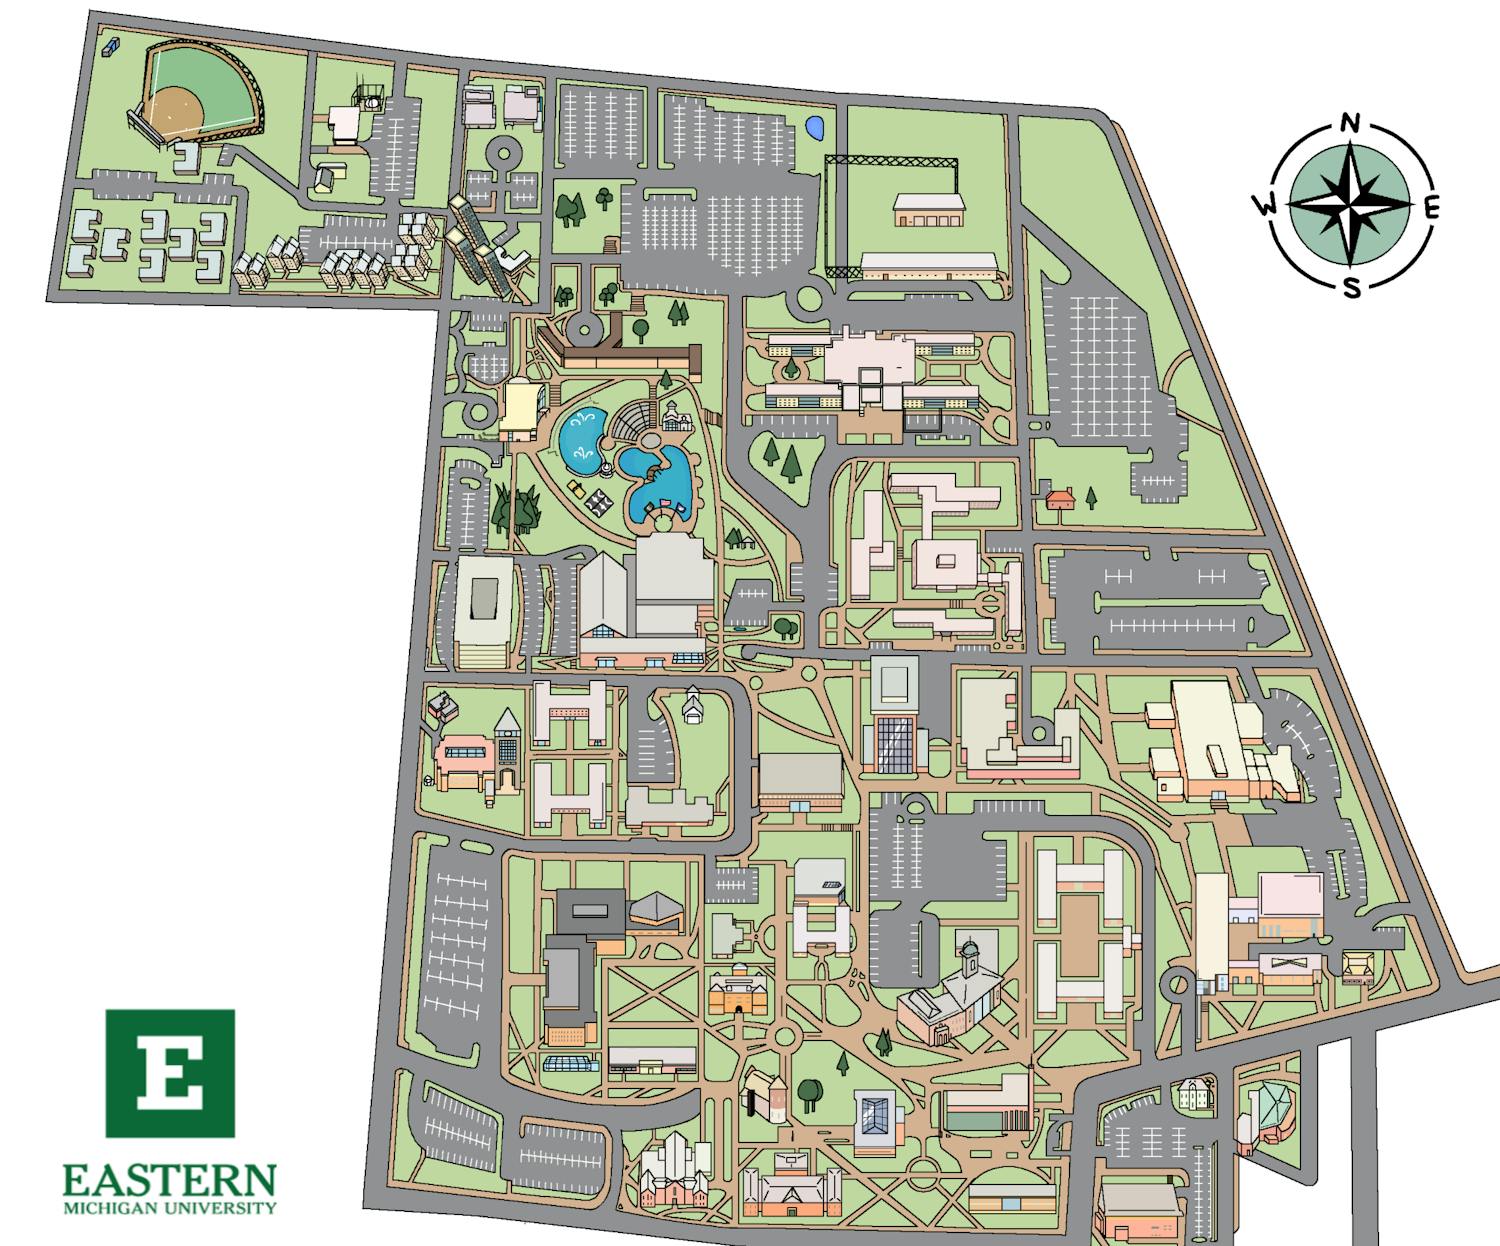 This color map shows the structures and parking and natural areas of Eastern Michigan University's campus in Ypsilanti, Michigan.